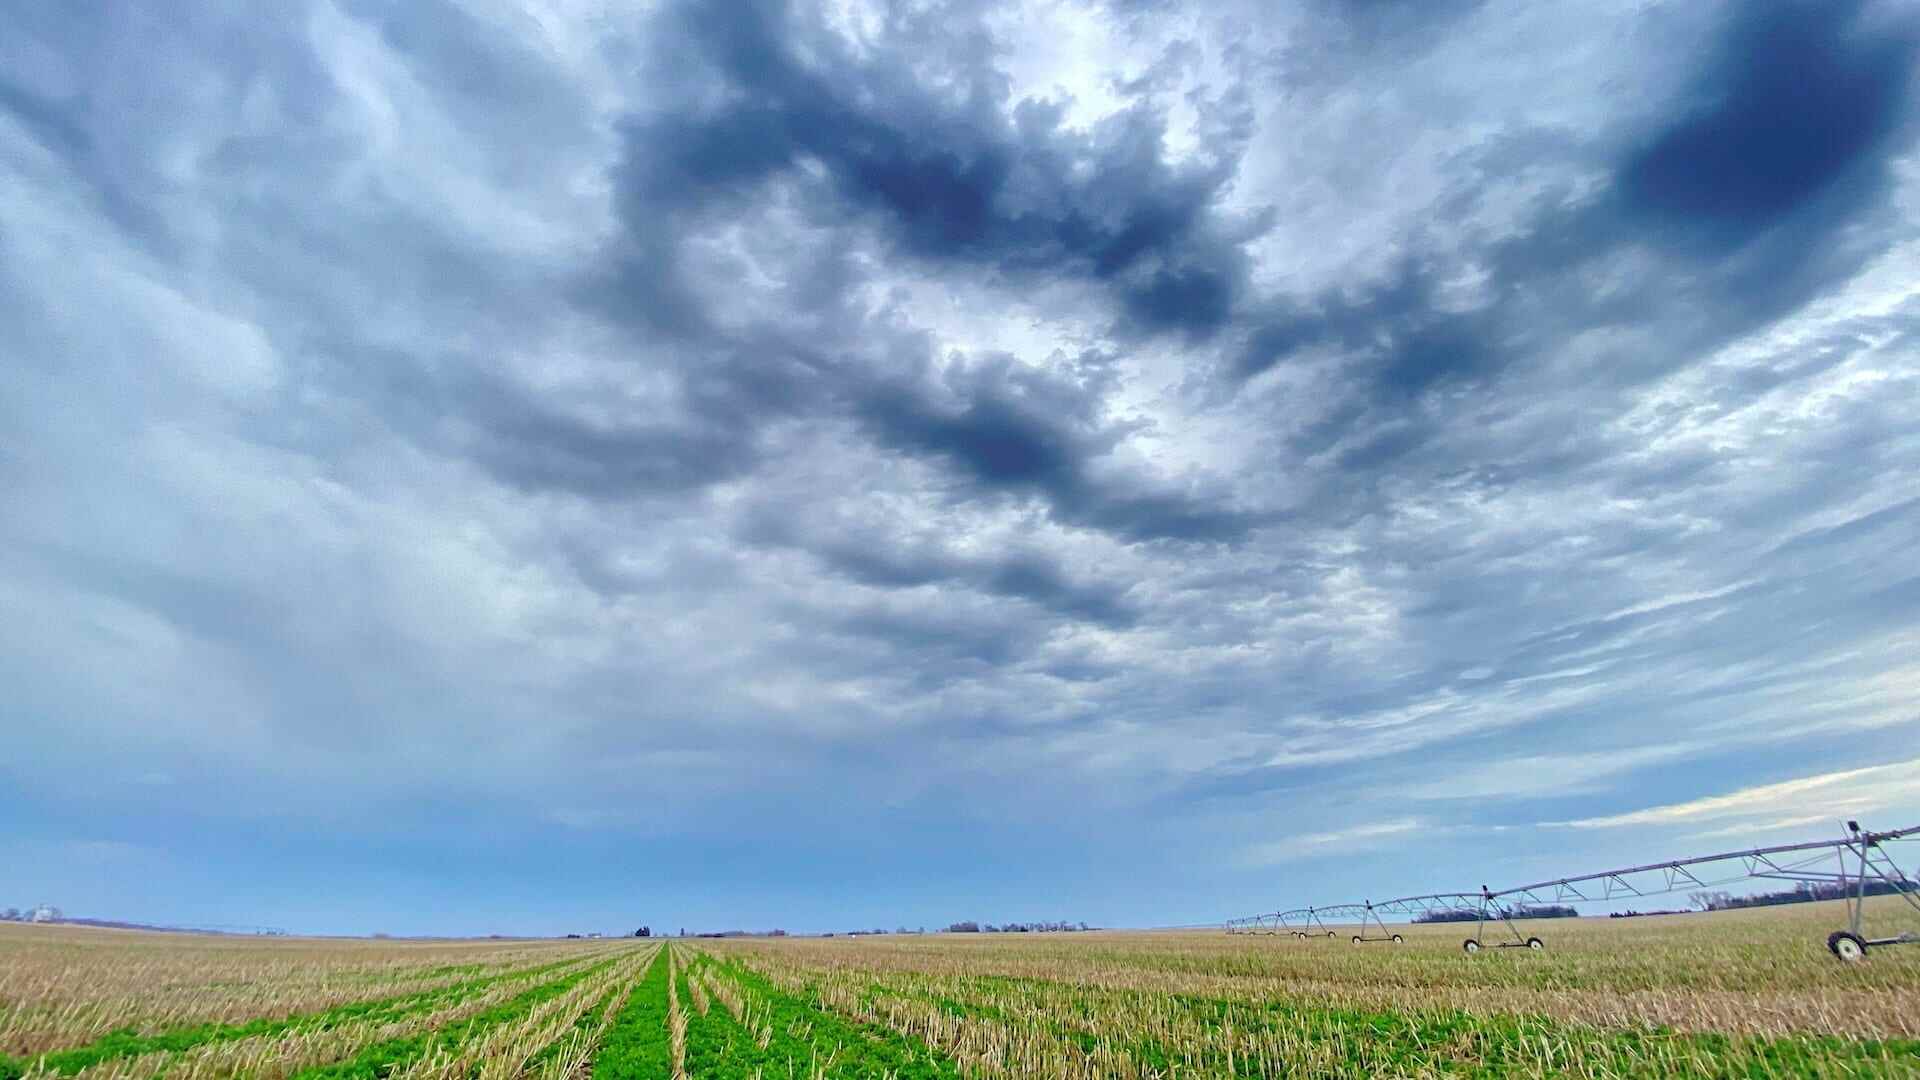 Experts are divided on climate-friendly farming’s effectiveness